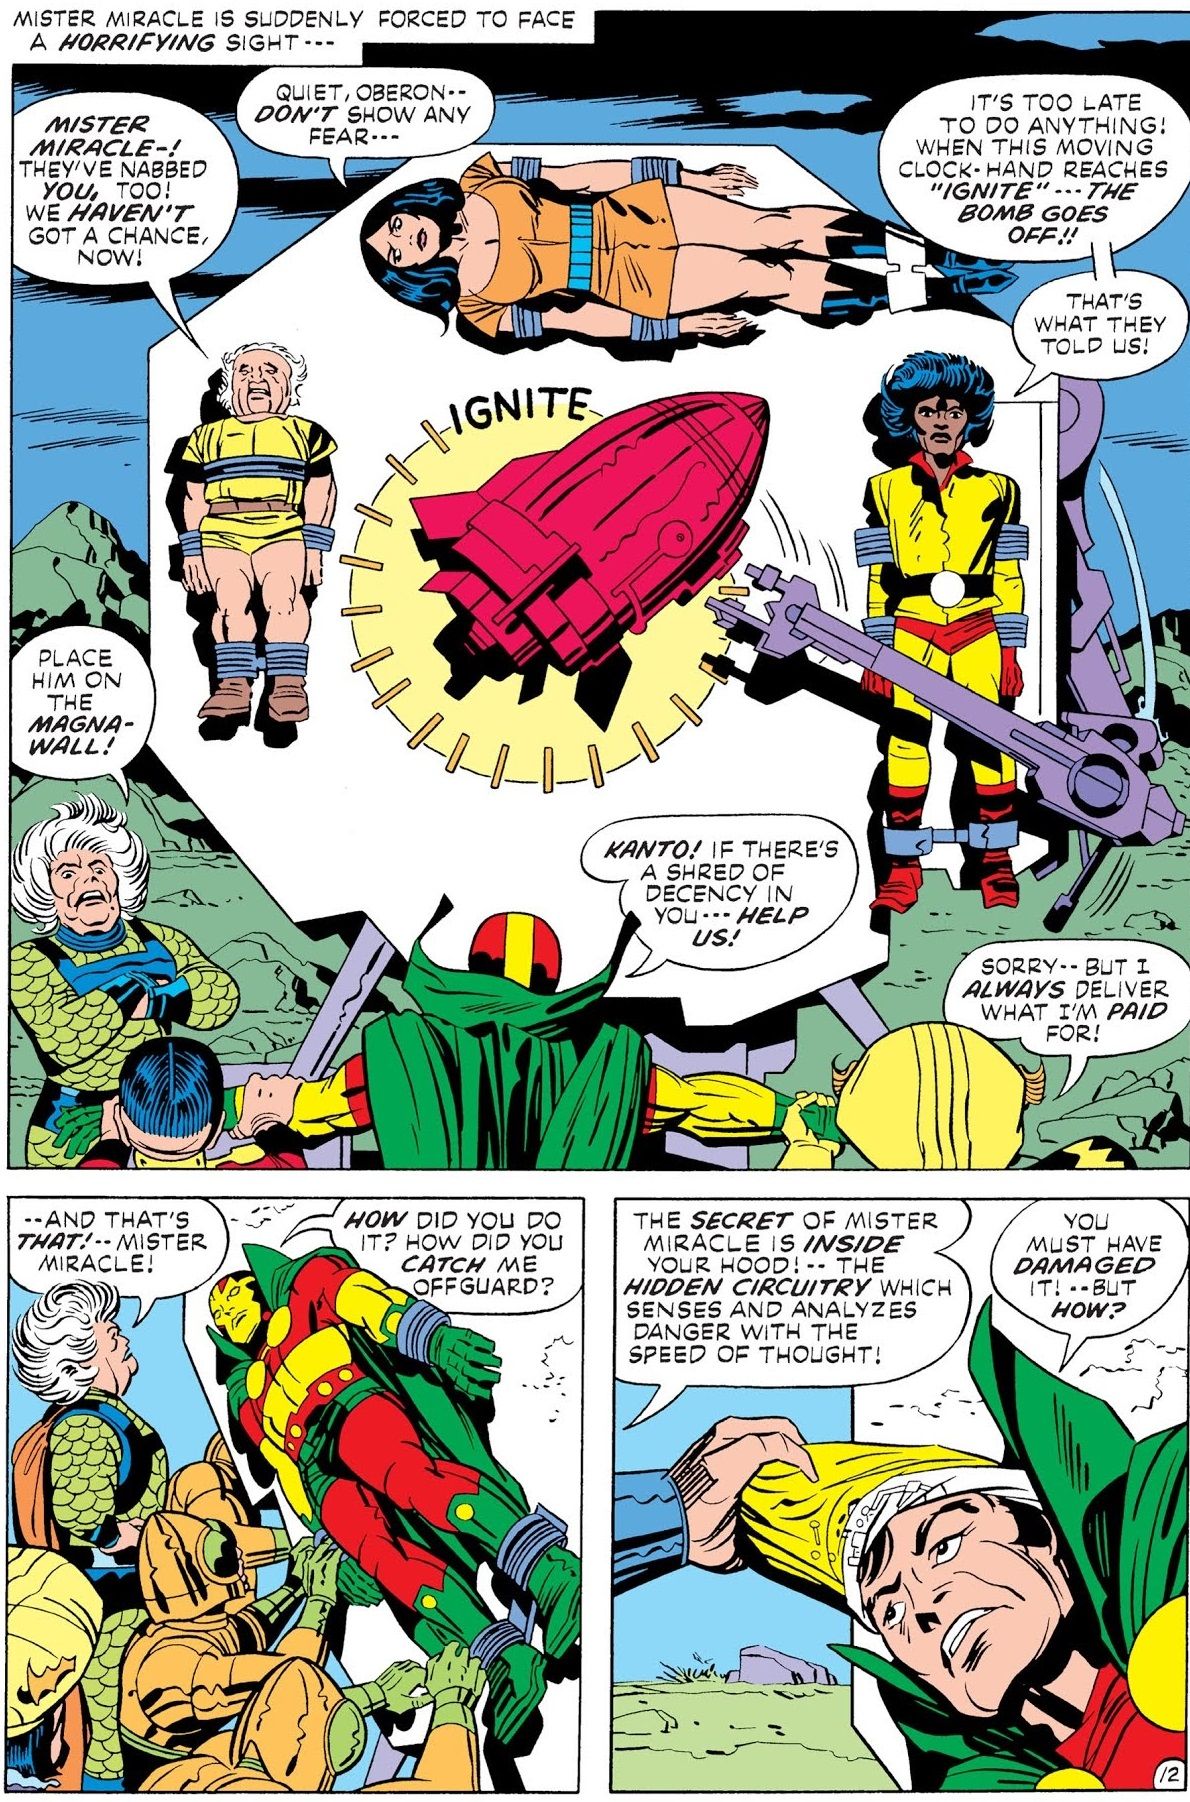 Mister Miracle and his friends are put on a bomb